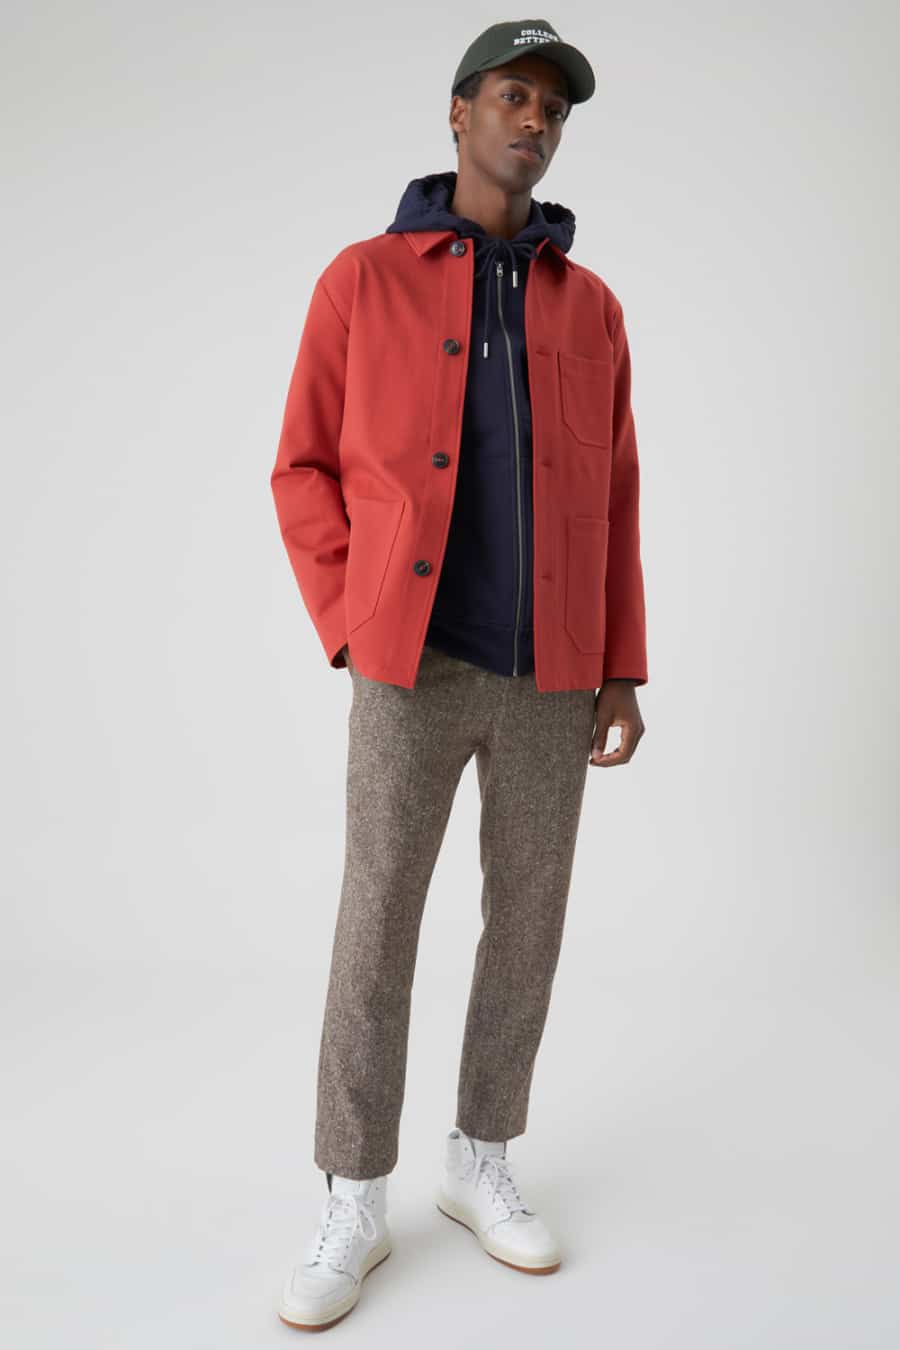 Men's brown wool trousers, navy hoodie, red chore jacket and white high-top sneakers outfit